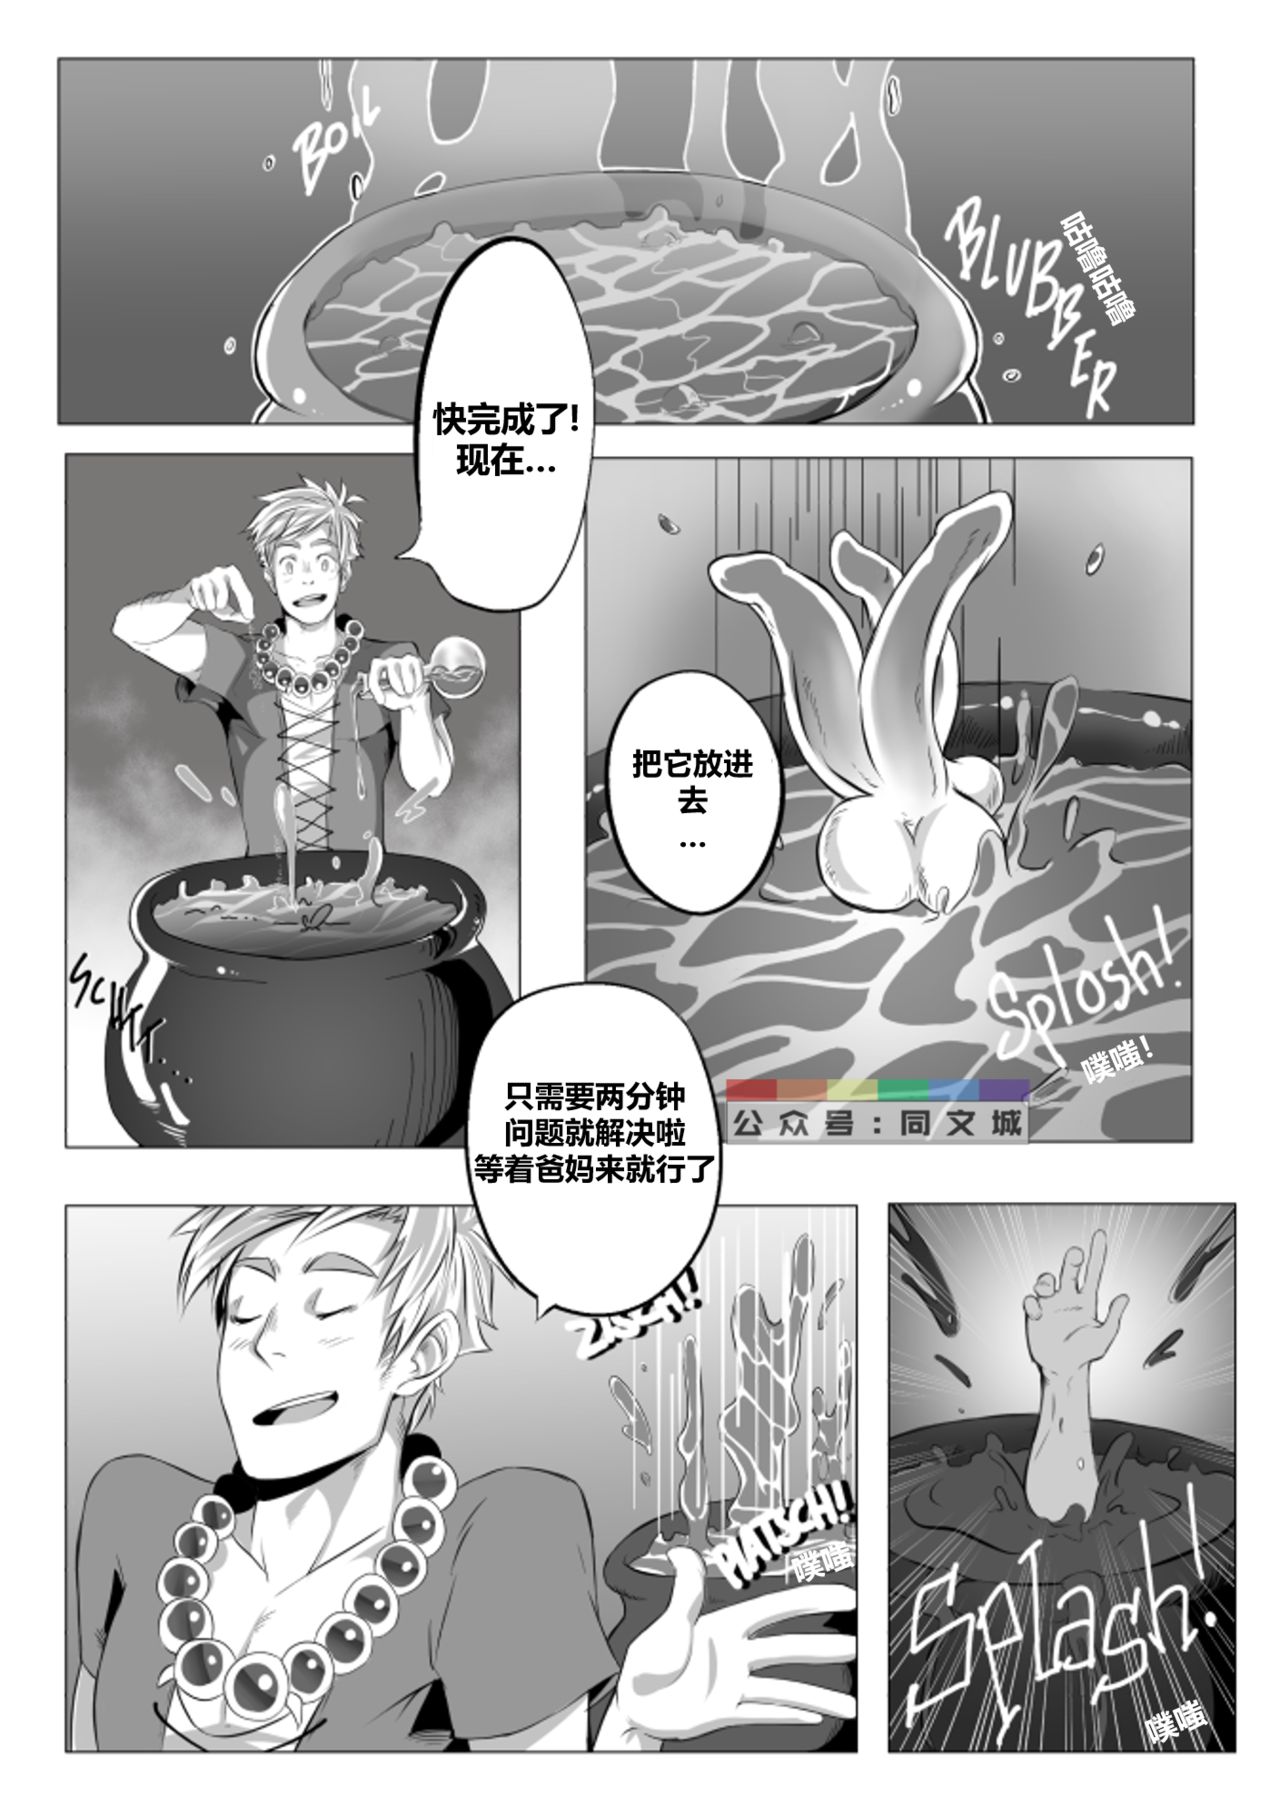 Jasdavi – Keep it Clean!（Chinese） page 5 full